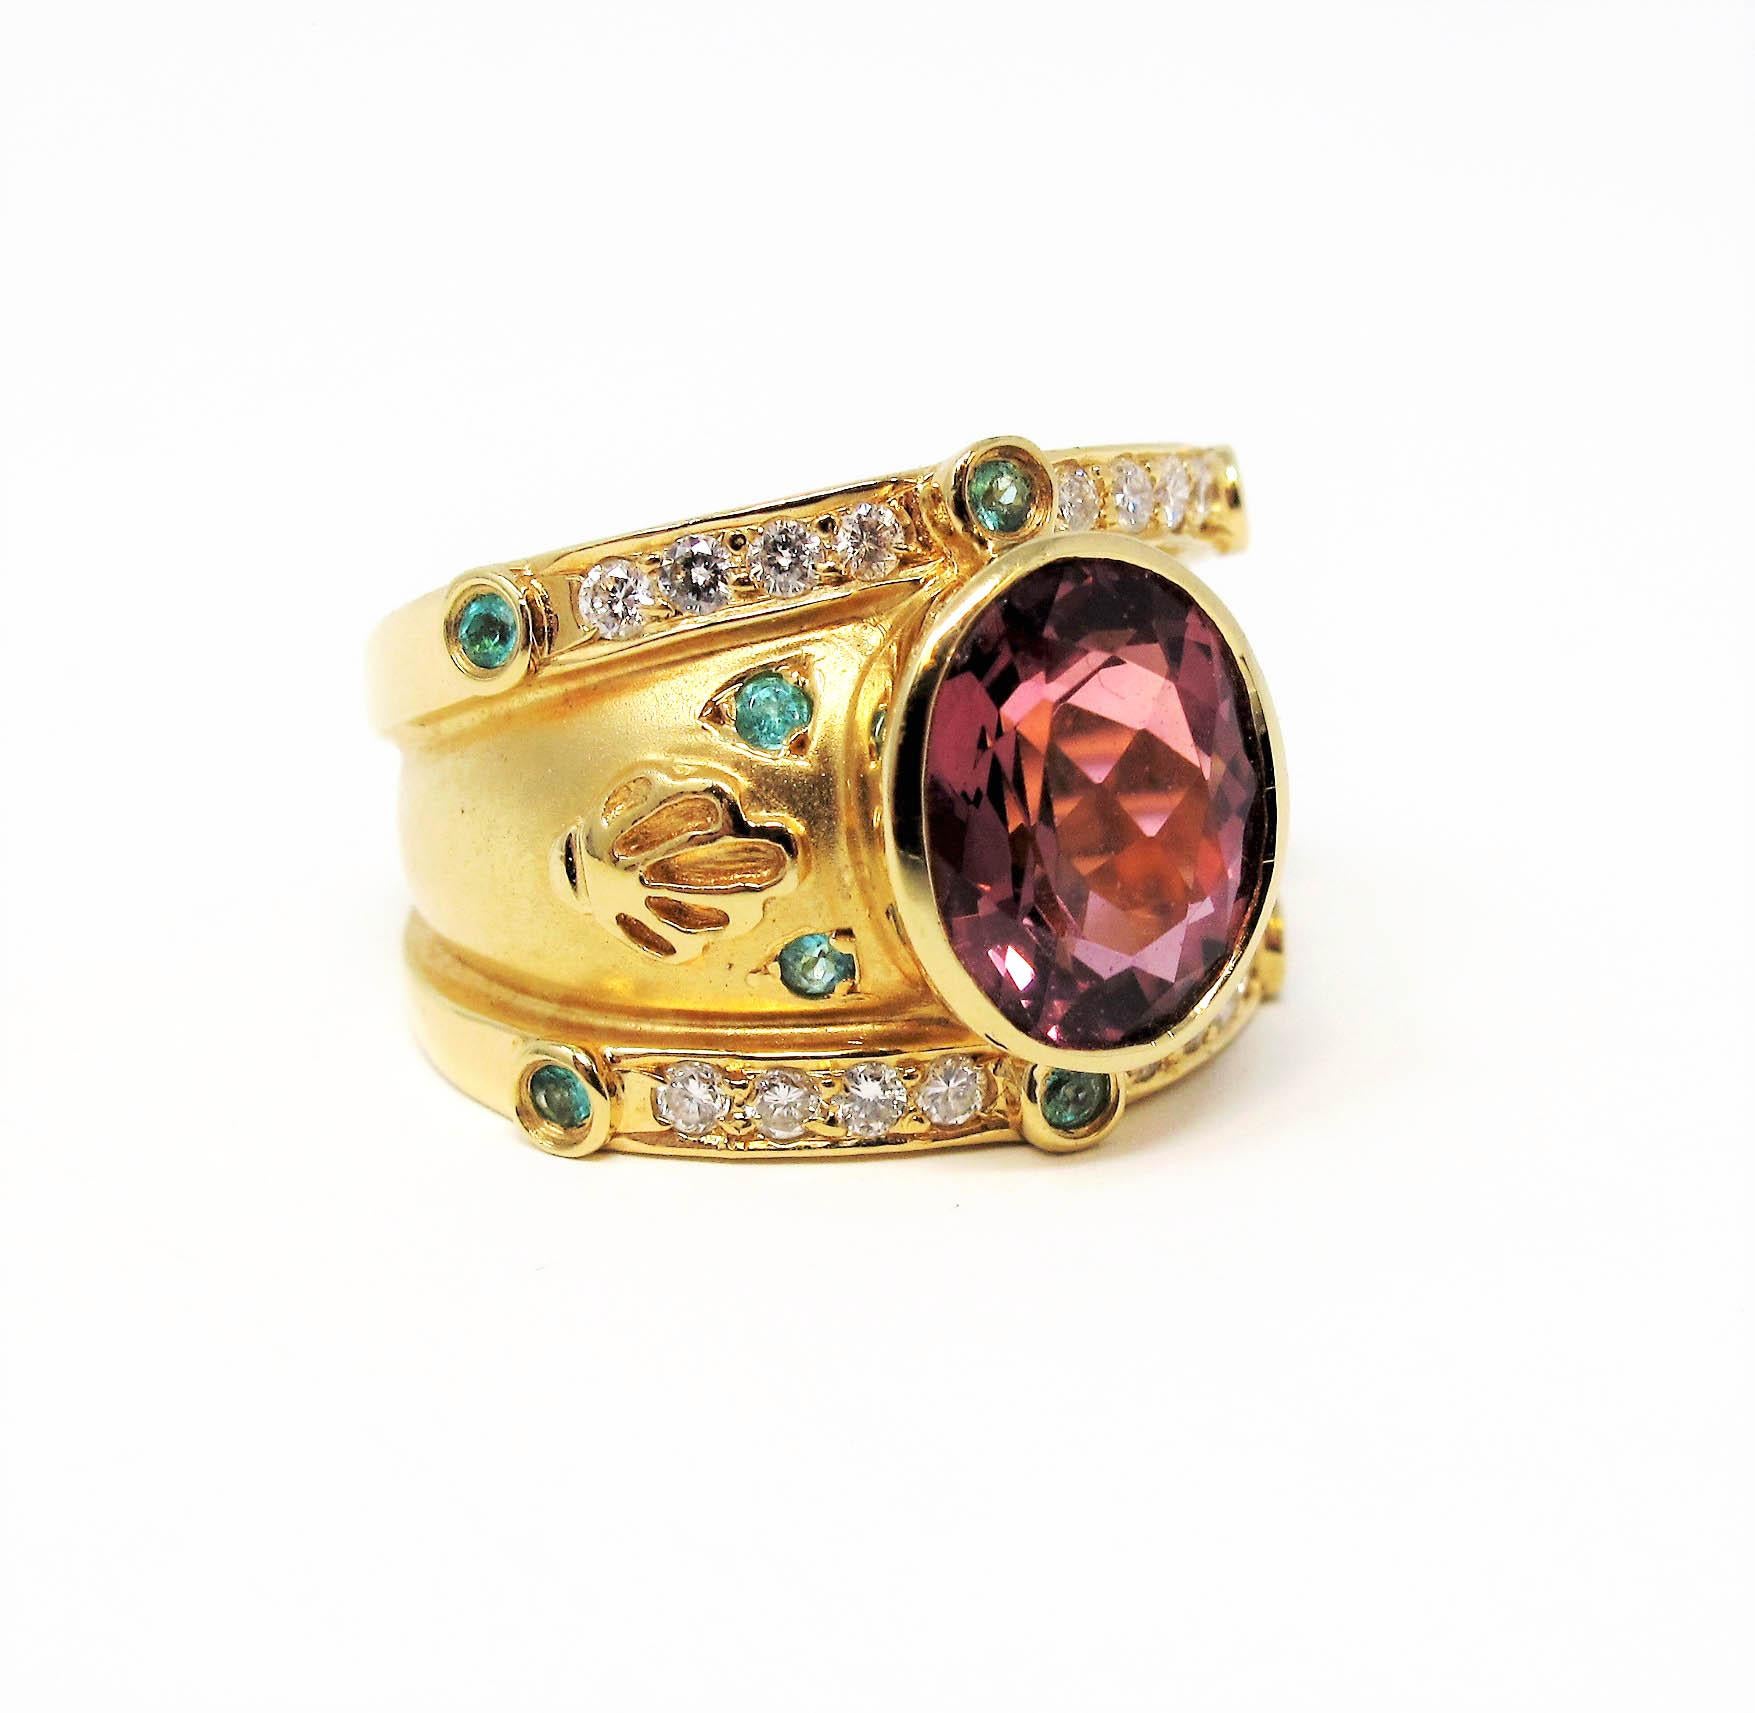 Gorgeous Etruscan style band ring featuring vibrant tourmaline gemstones and diamonds.  This stunning ornate cigar band ring by jewelry designer Judy Mayfield is bursting with bold color and design. The incredible pink, green and white stones paired